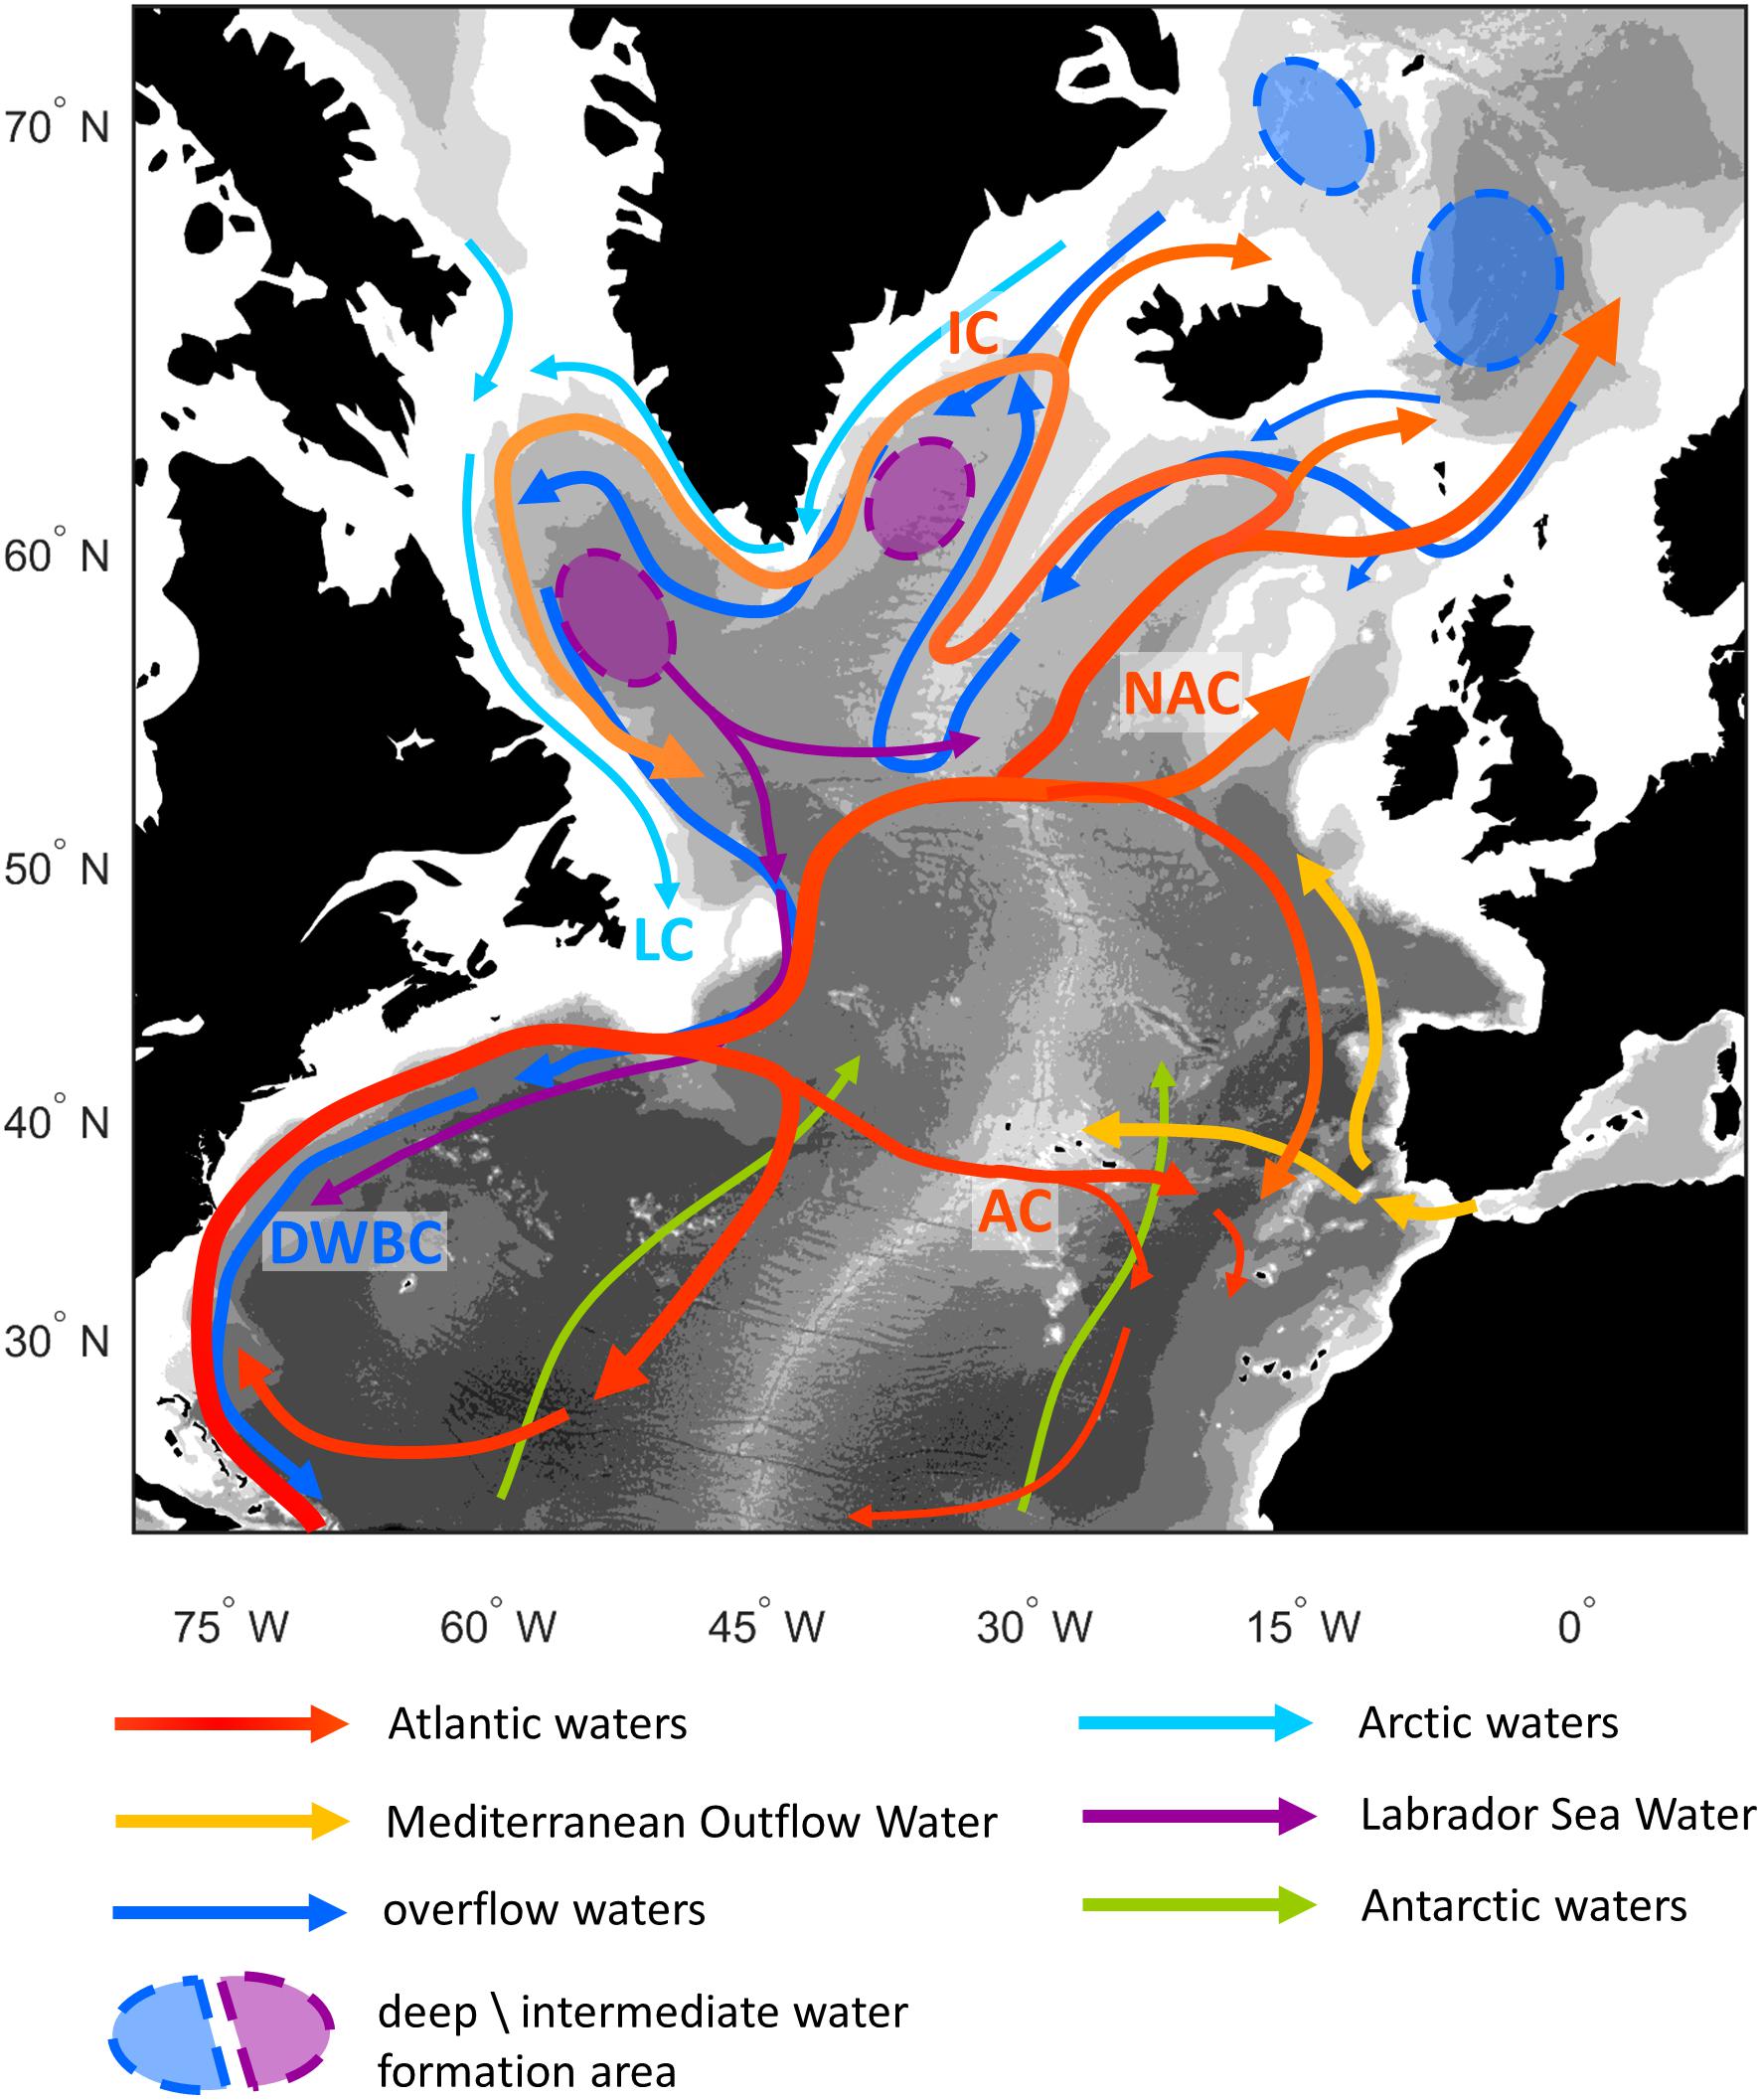 Frontiers Influence Of Water Masses On The Biodiversity And Biogeography Of Deep Sea Benthic Ecosystems In The North Atlantic Marine Science